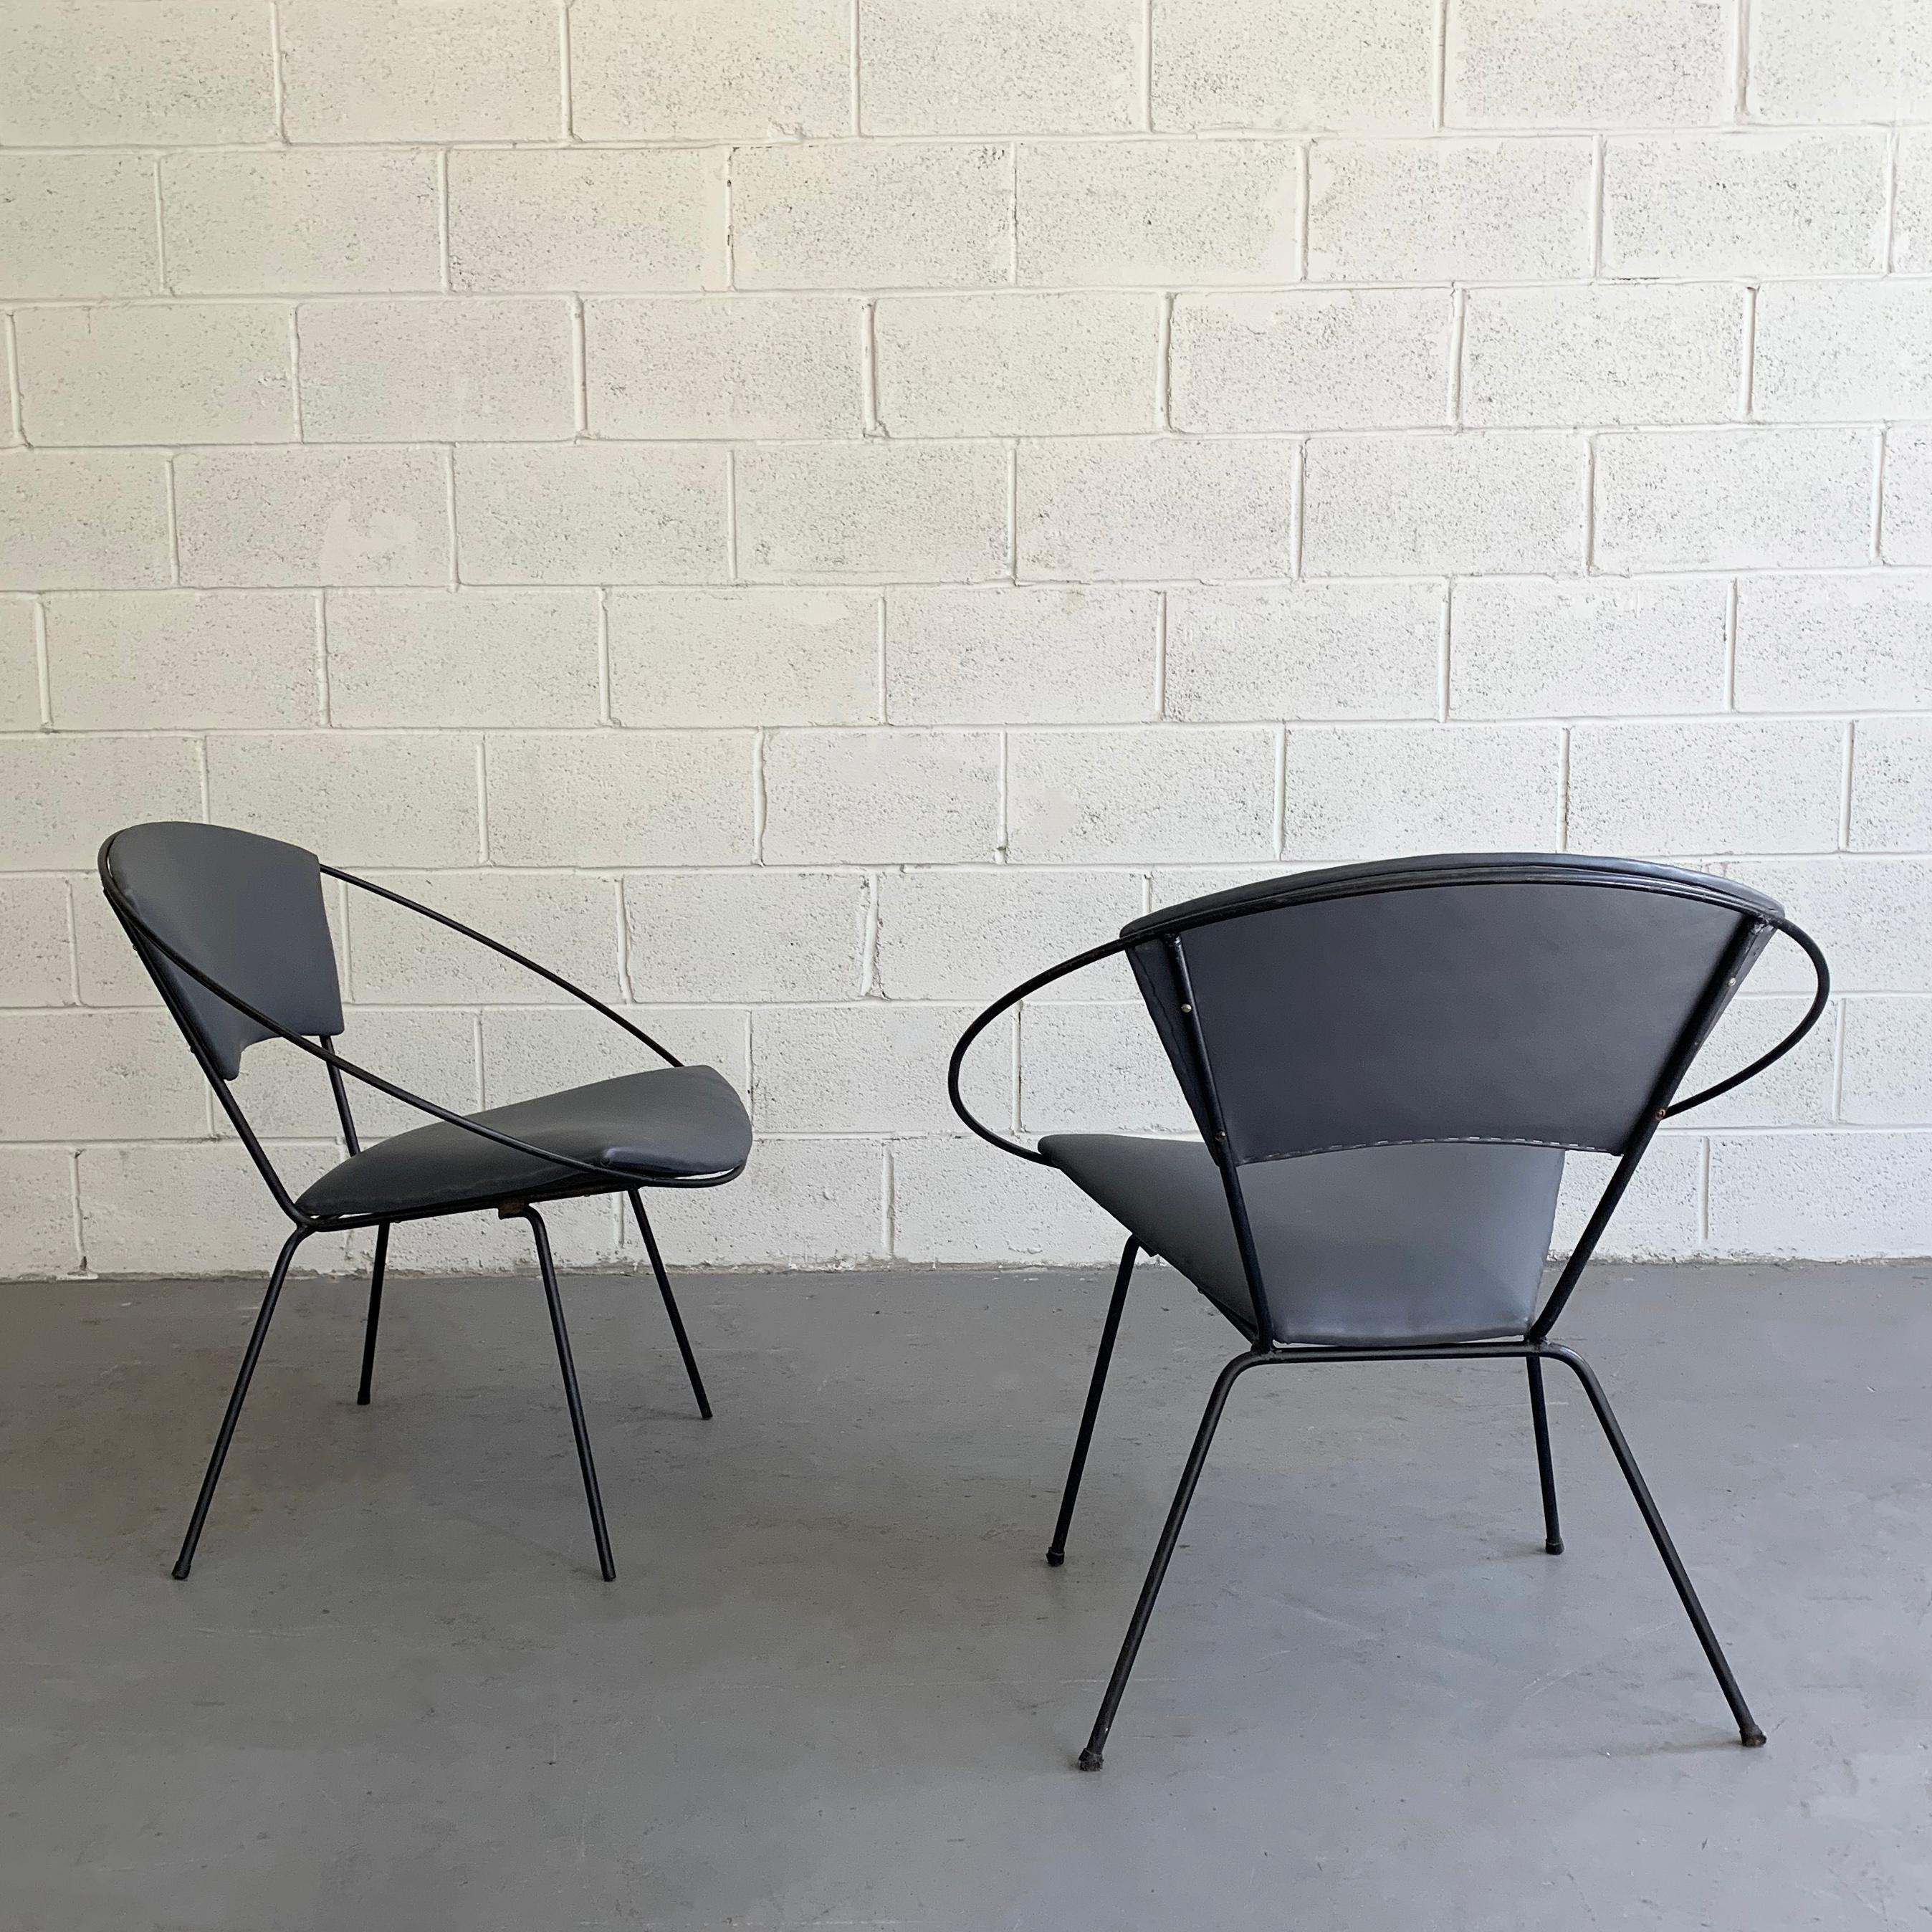 20th Century Mid-Century Modern Wrought Iron Upholstered Hoop Chairs